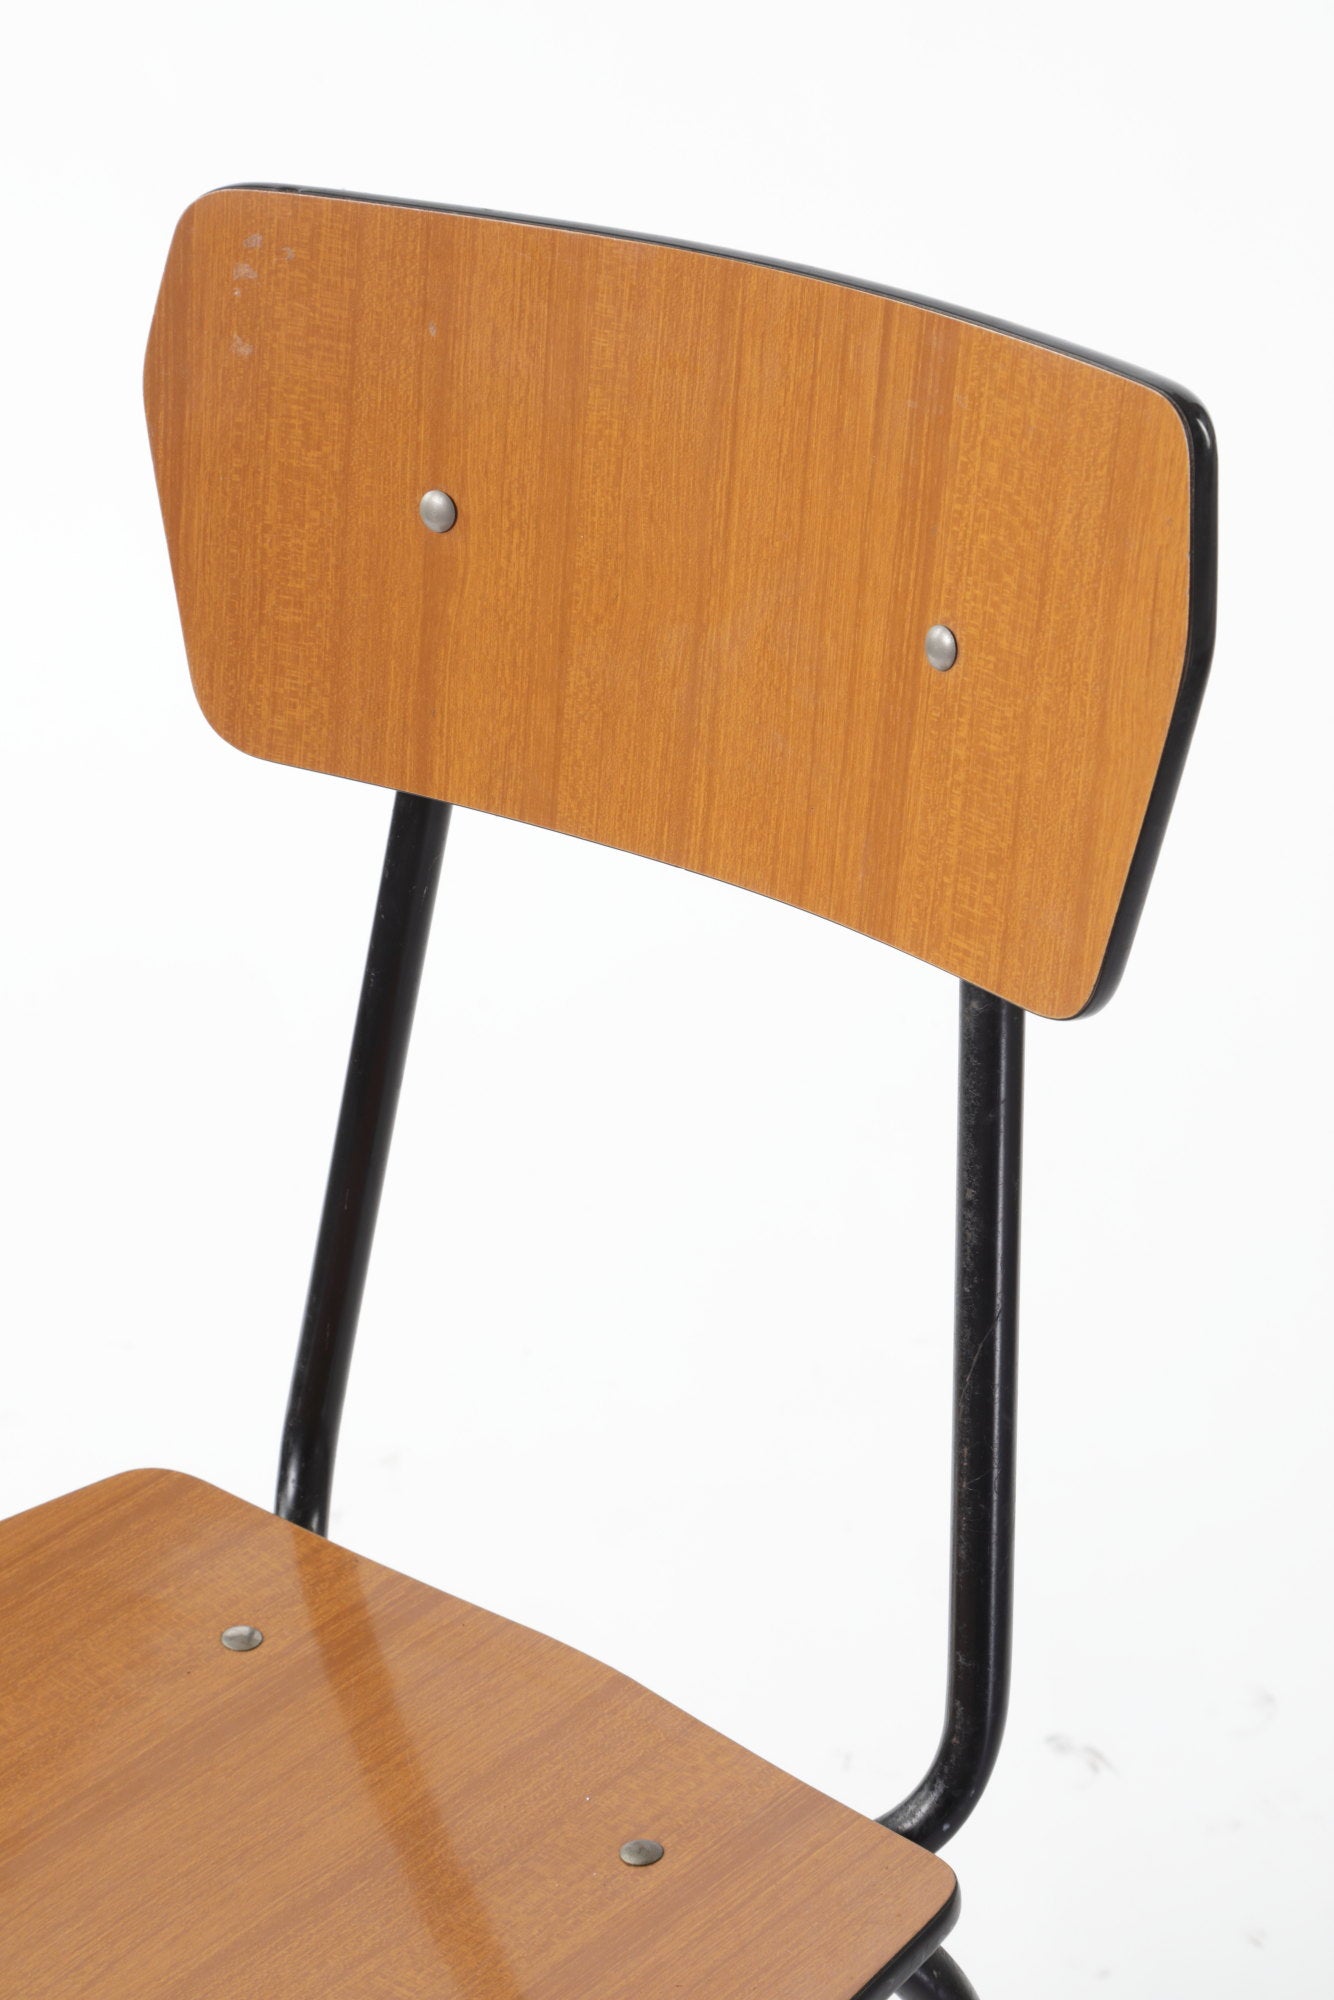 Pair of formica chairs from the 60s